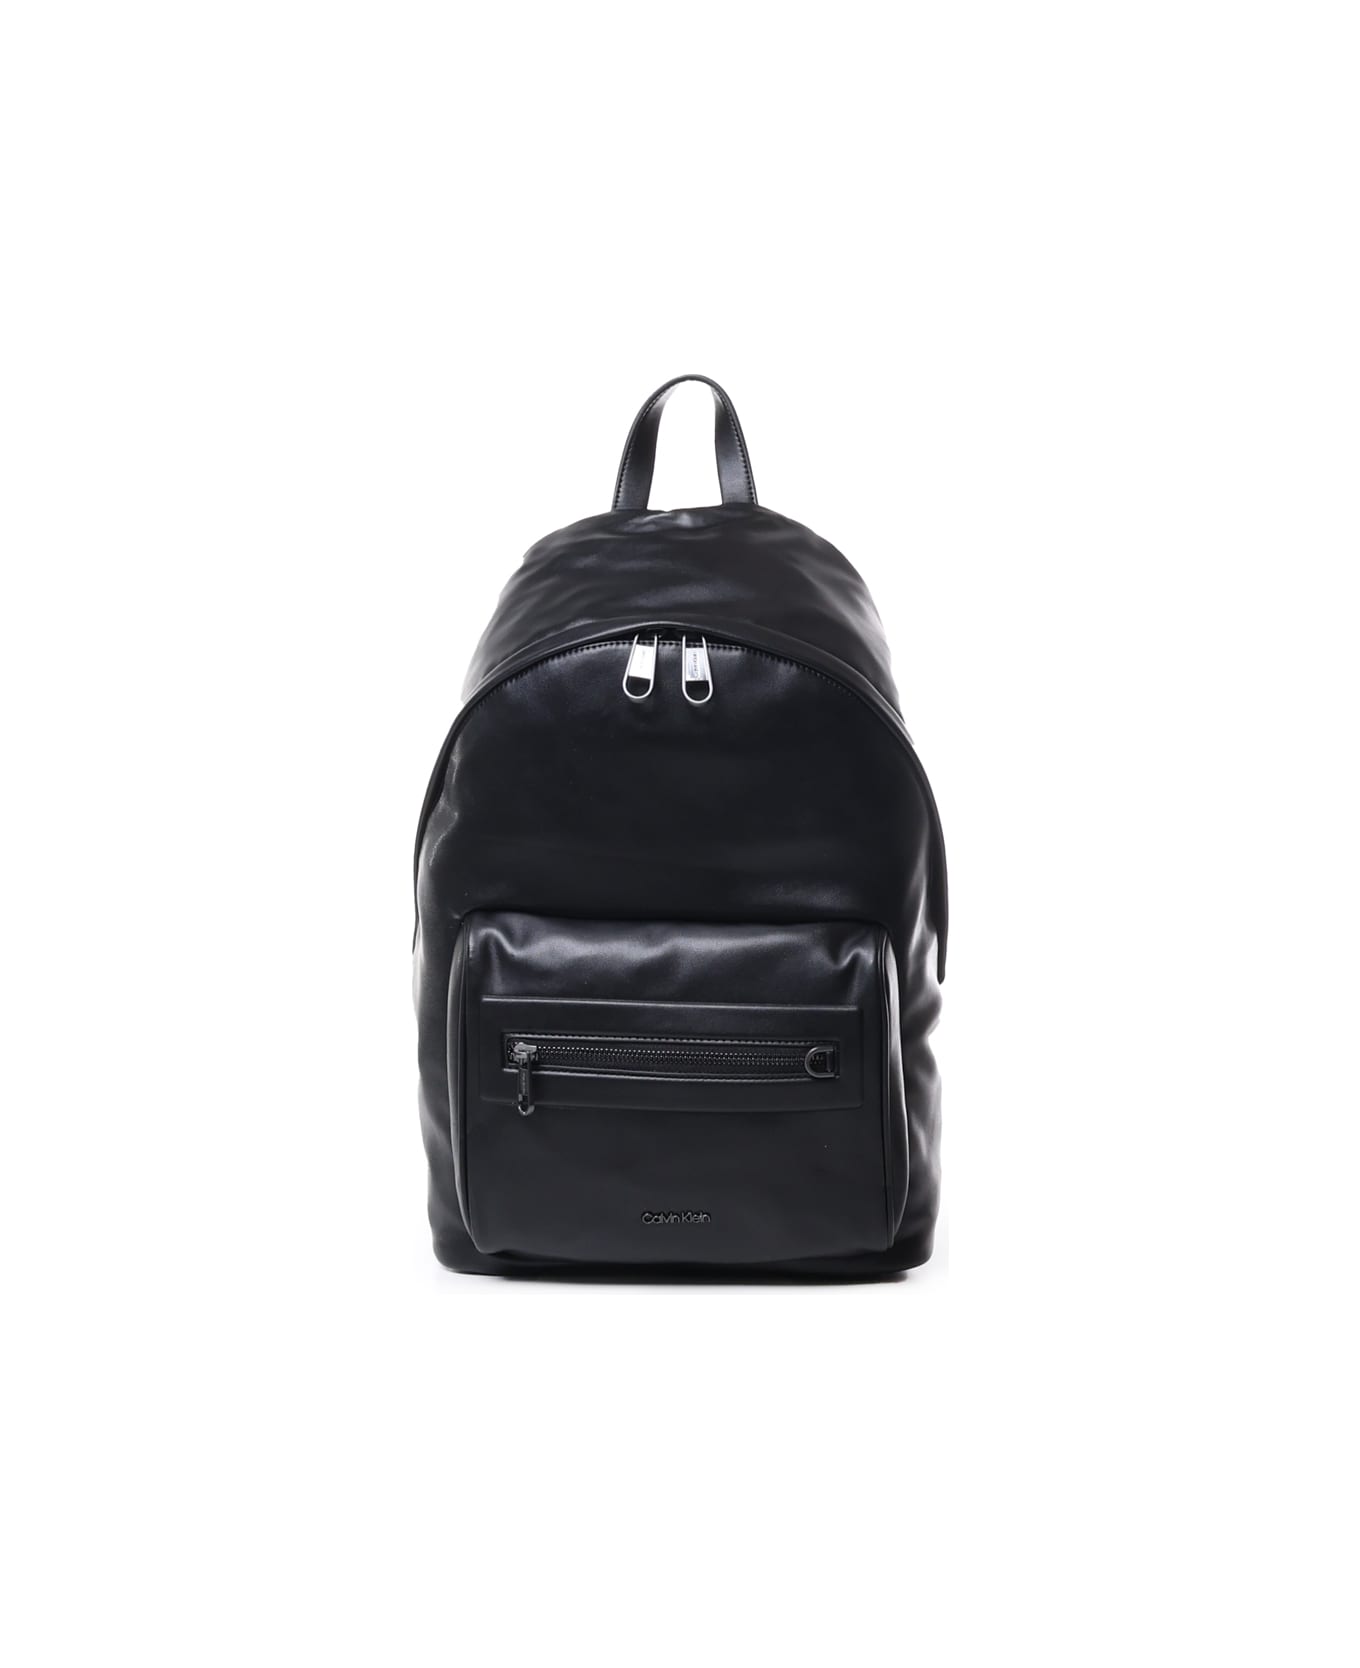 Calvin Klein Faux Leather Backpack - Black バックパック